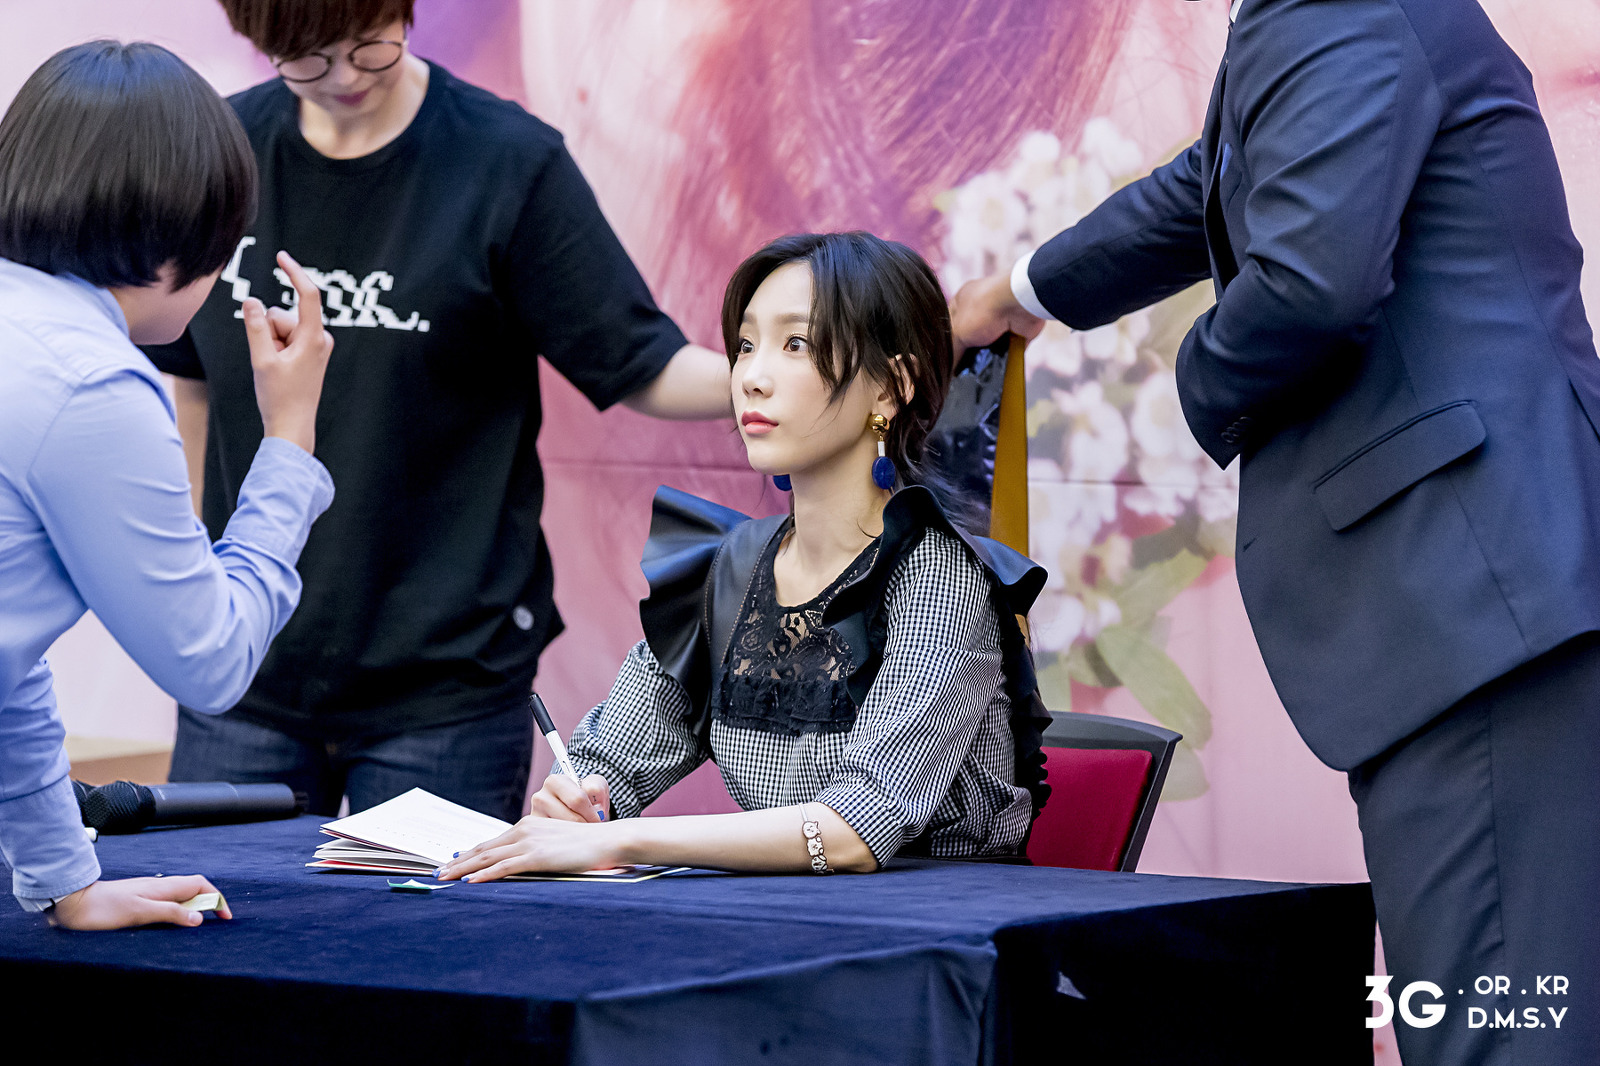 [PIC][16-04-2017]TaeYeon tham dự buổi Fansign cho “MY VOICE DELUXE EDITION” tại AK PLAZA vào chiều nay  - Page 5 227A574558FDD8F01D1899